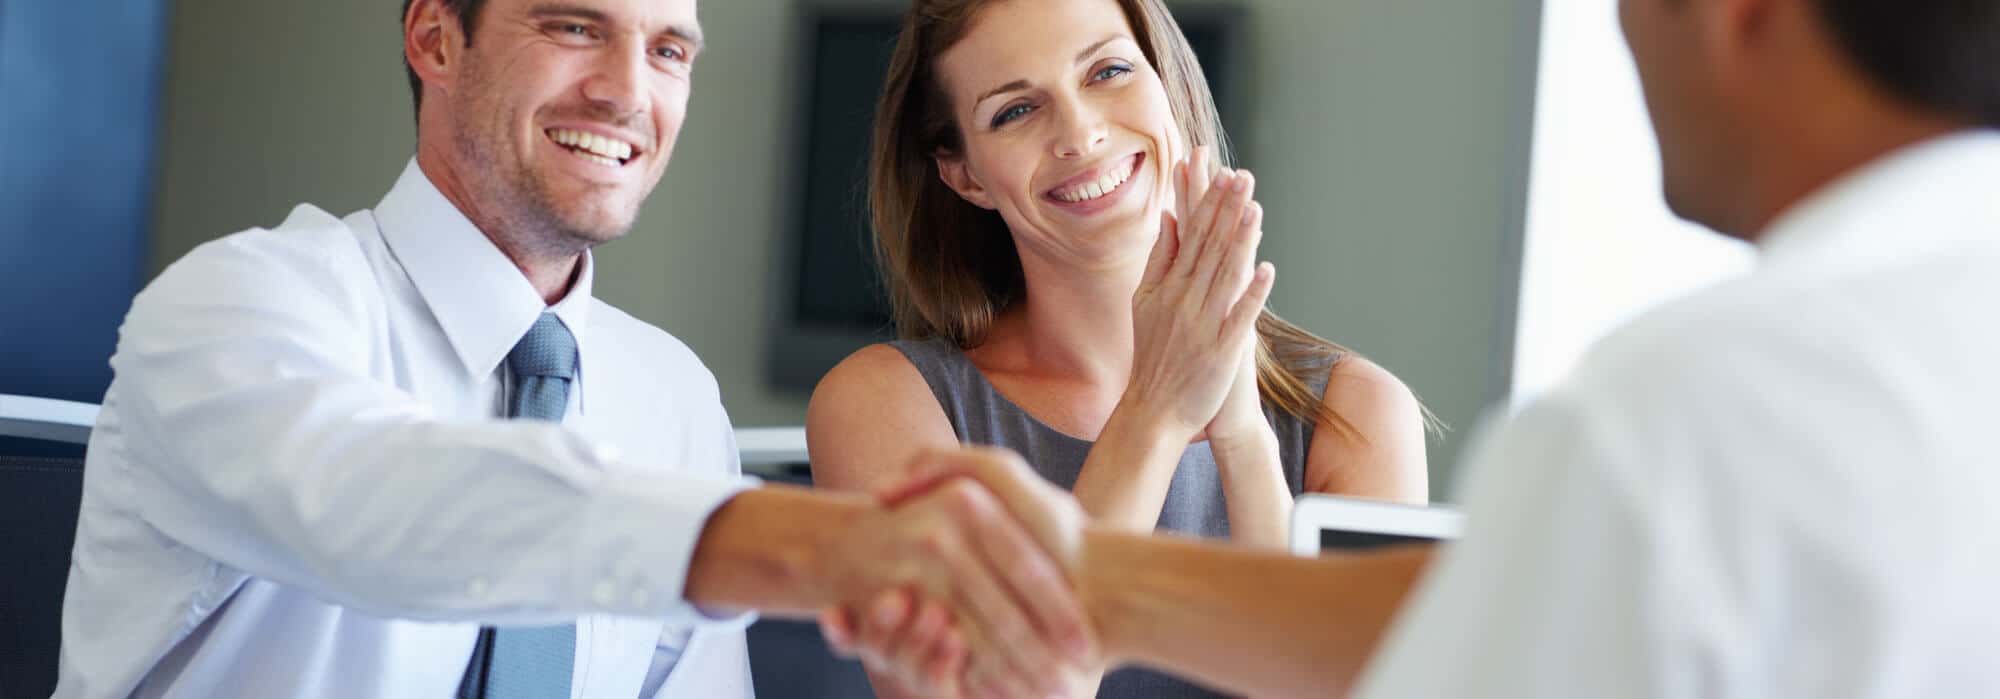 Young man and woman smiling and shaking the hand of a businessman